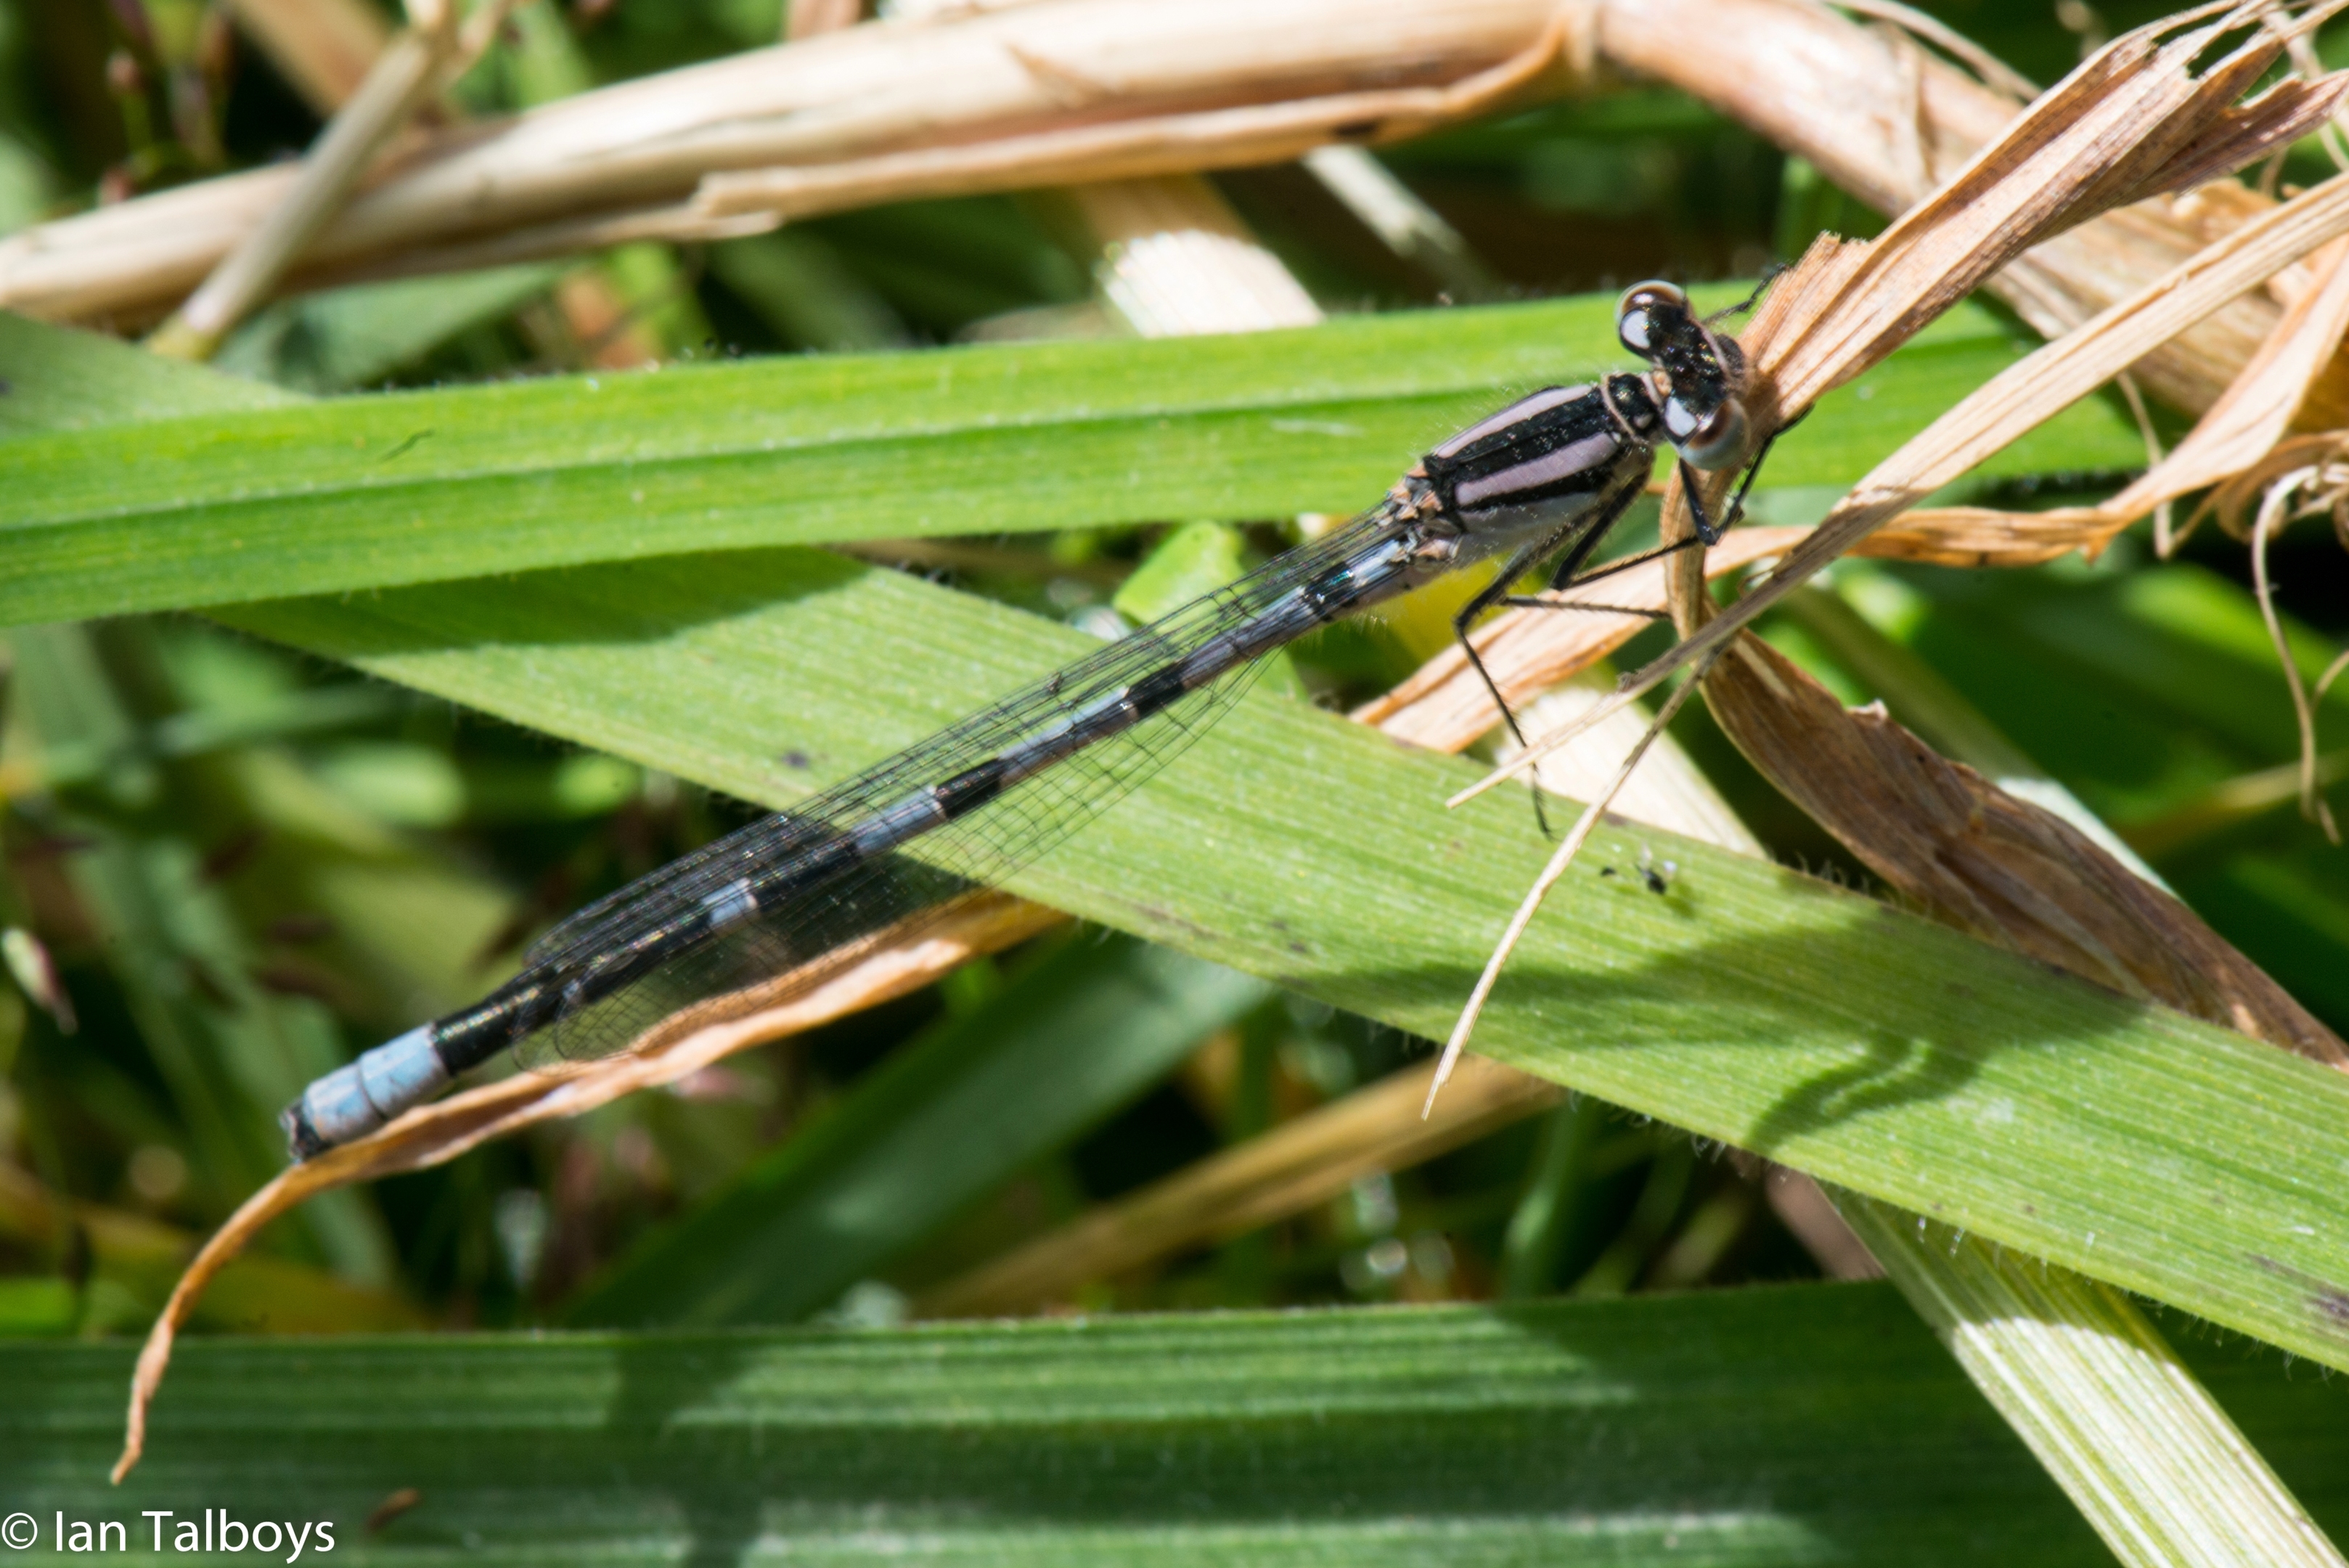 A blue tailed damsel at Scotstown Moor